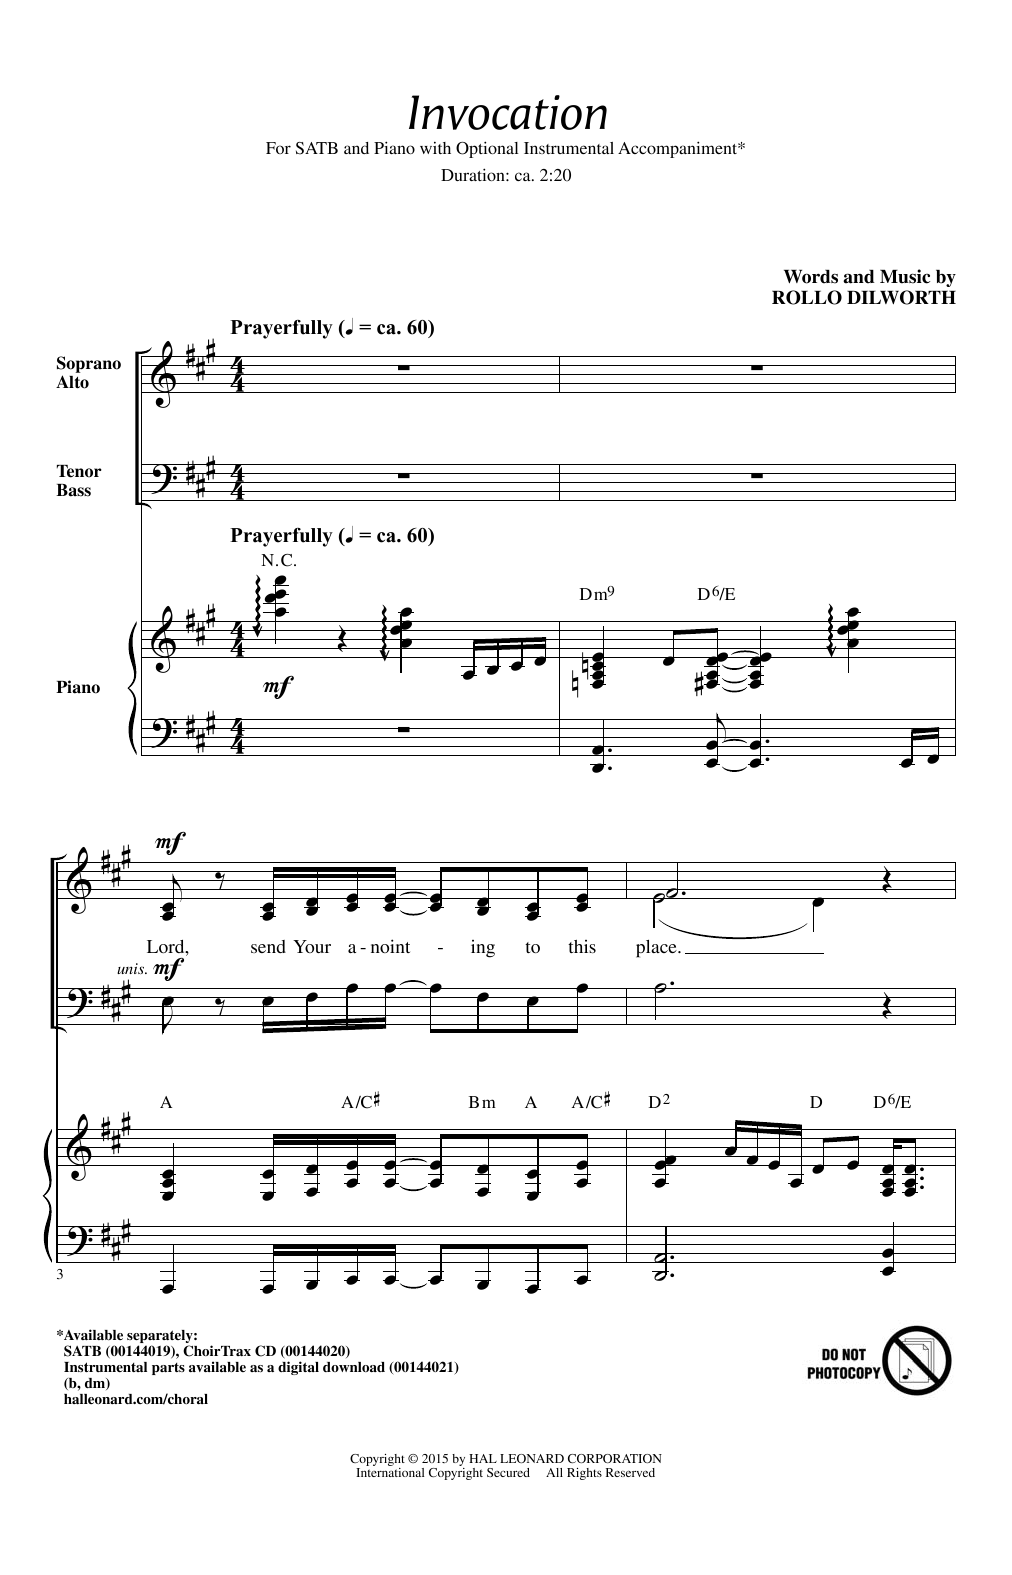 Download Rollo Dilworth Invocation Sheet Music